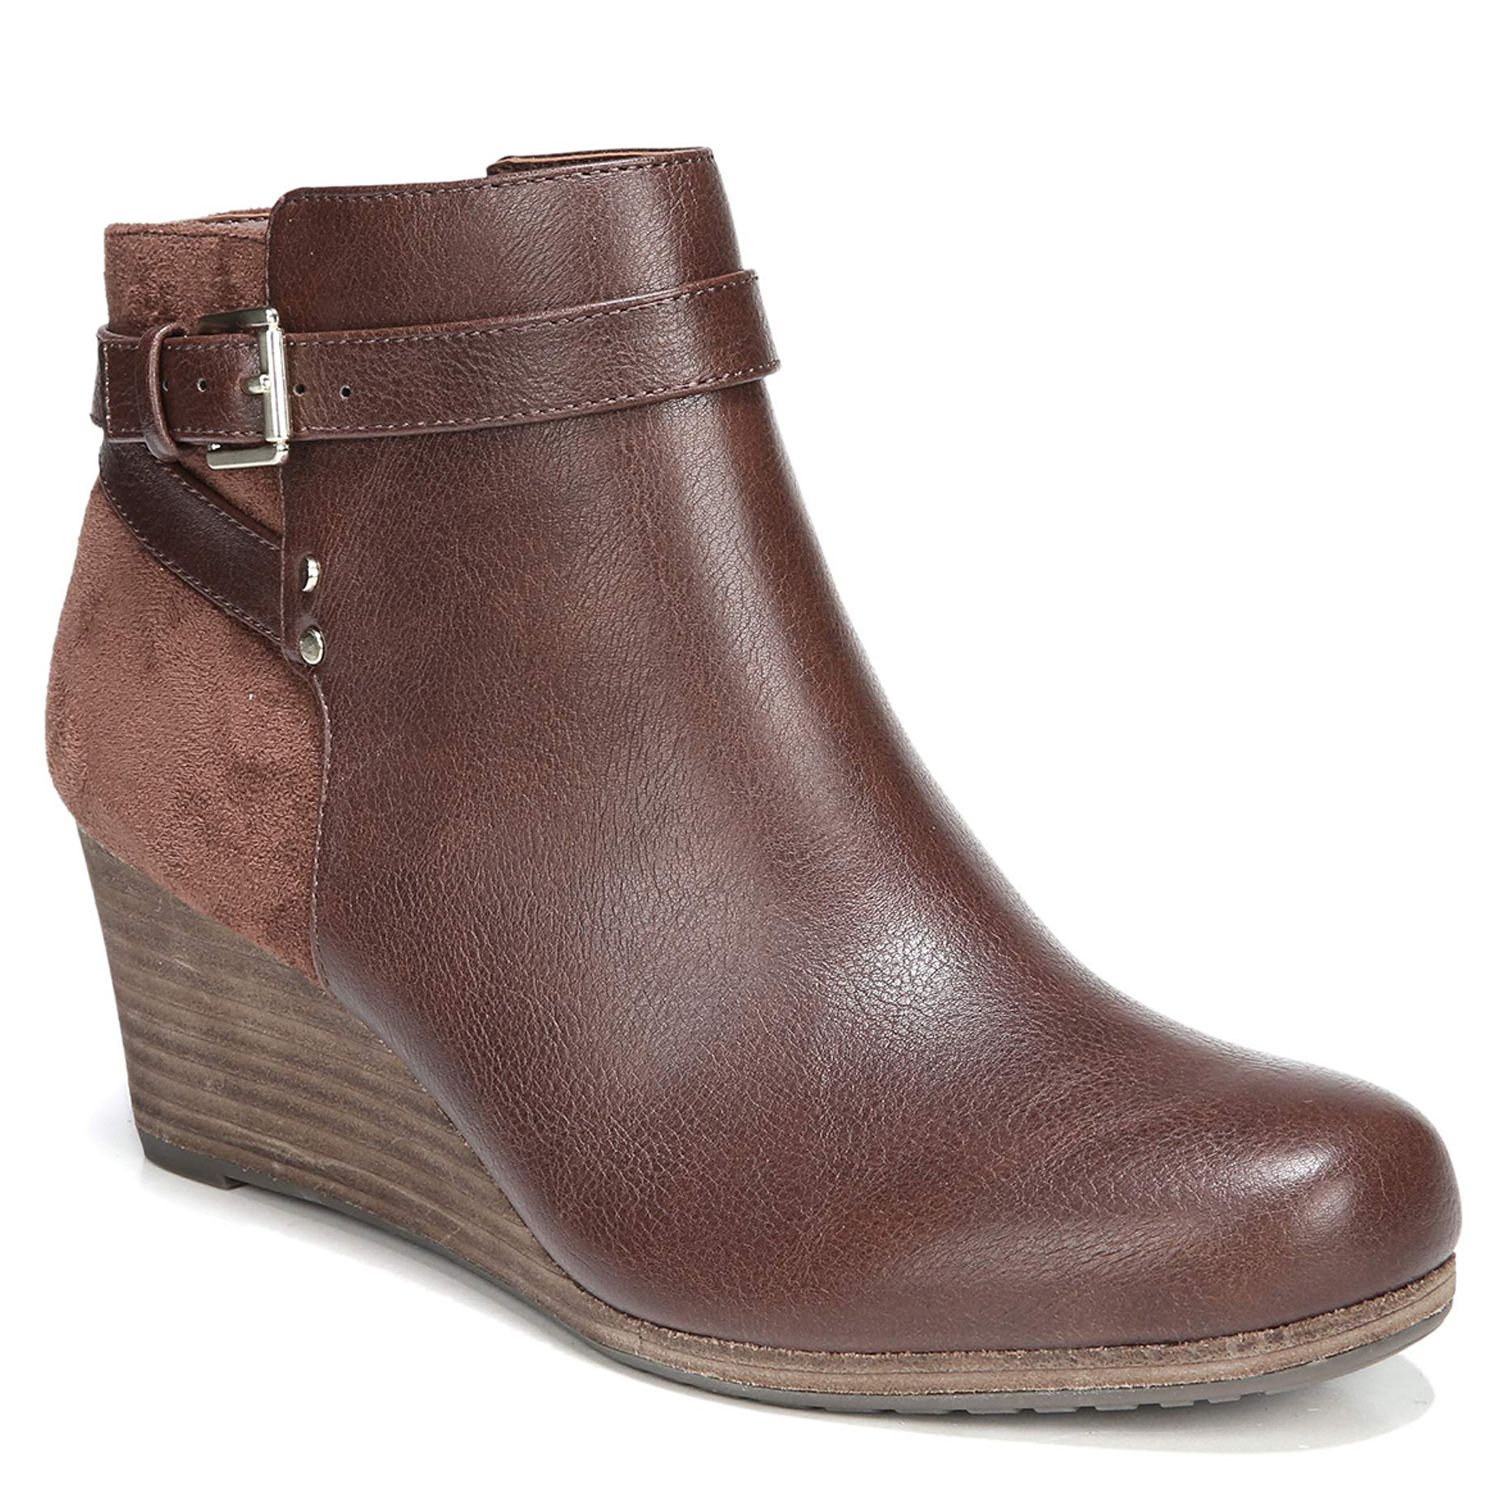 Image for Dr. Scholl's Double Women's Wedge Ankle Boots at Kohl's.